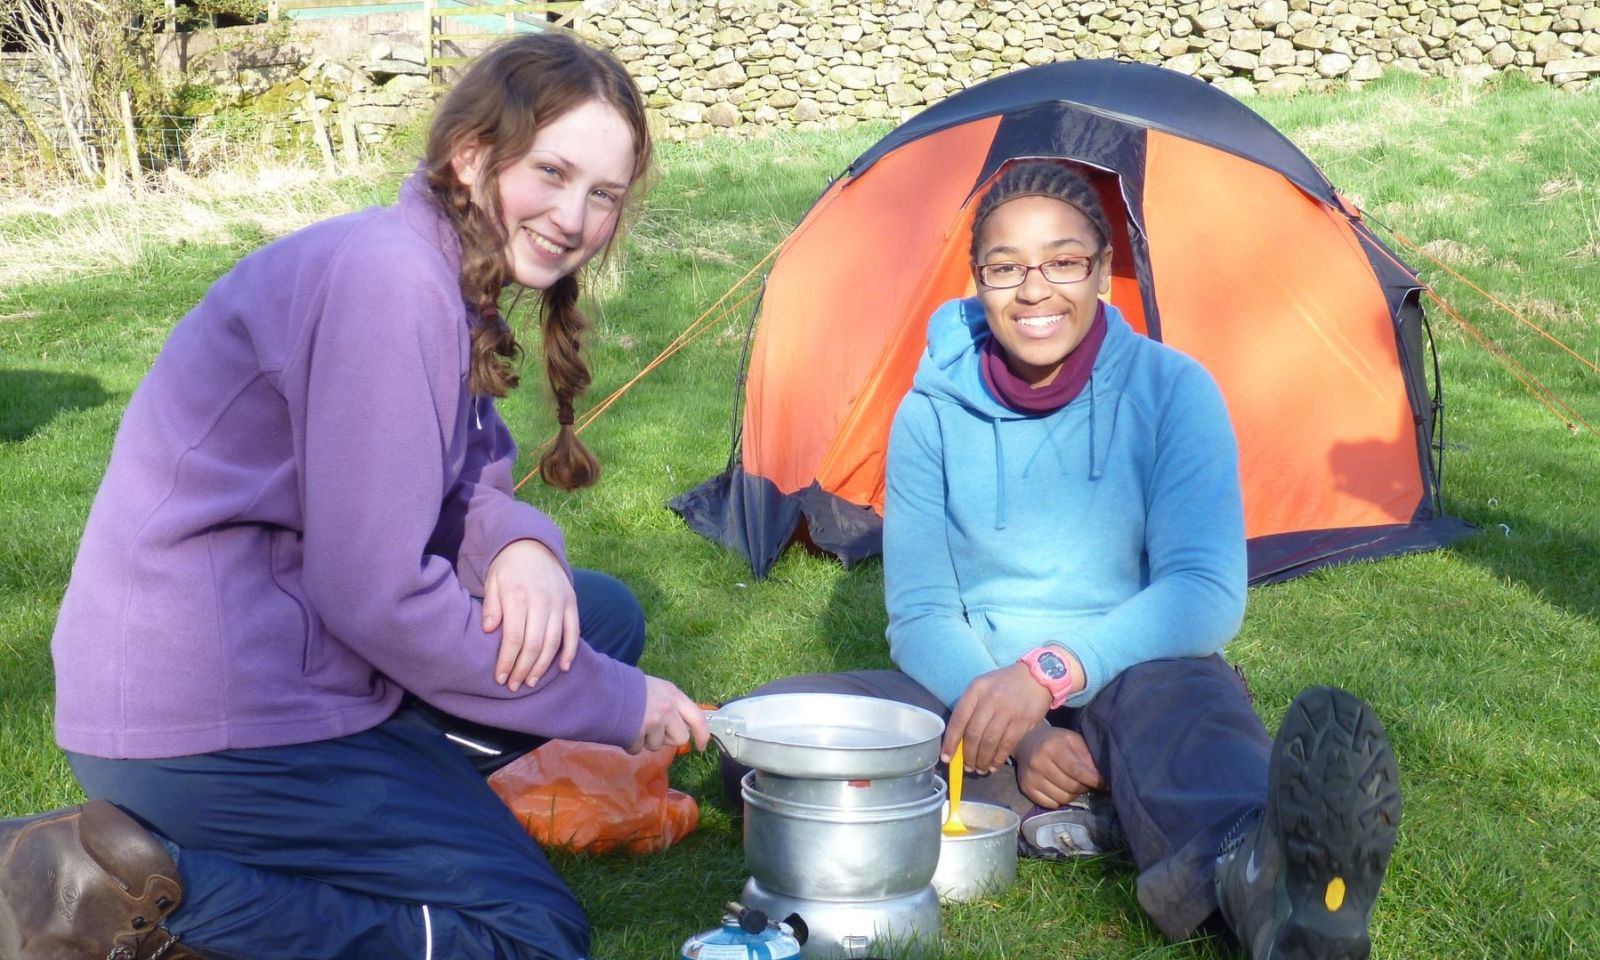 2 girls cooking on a stove and smiling on their DofE expedition.